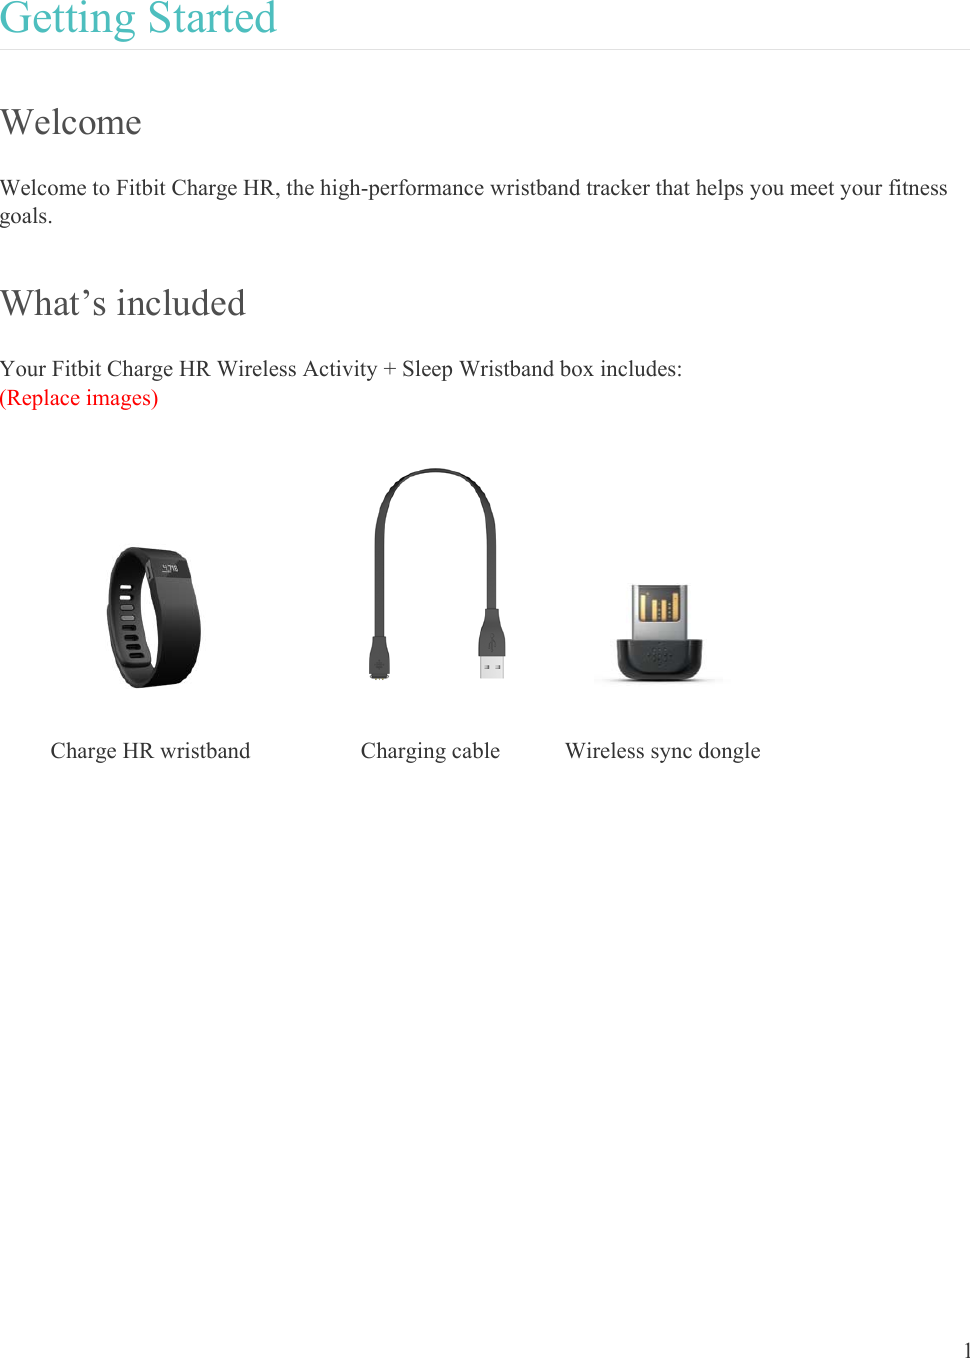 1  Getting Started Welcome Welcome to Fitbit Charge HR, the high-performance wristband tracker that helps you meet your fitness goals.  What’s included Your Fitbit Charge HR Wireless Activity + Sleep Wristband box includes: (Replace images)      Charge HR wristband  Charging cable  Wireless sync dongle                